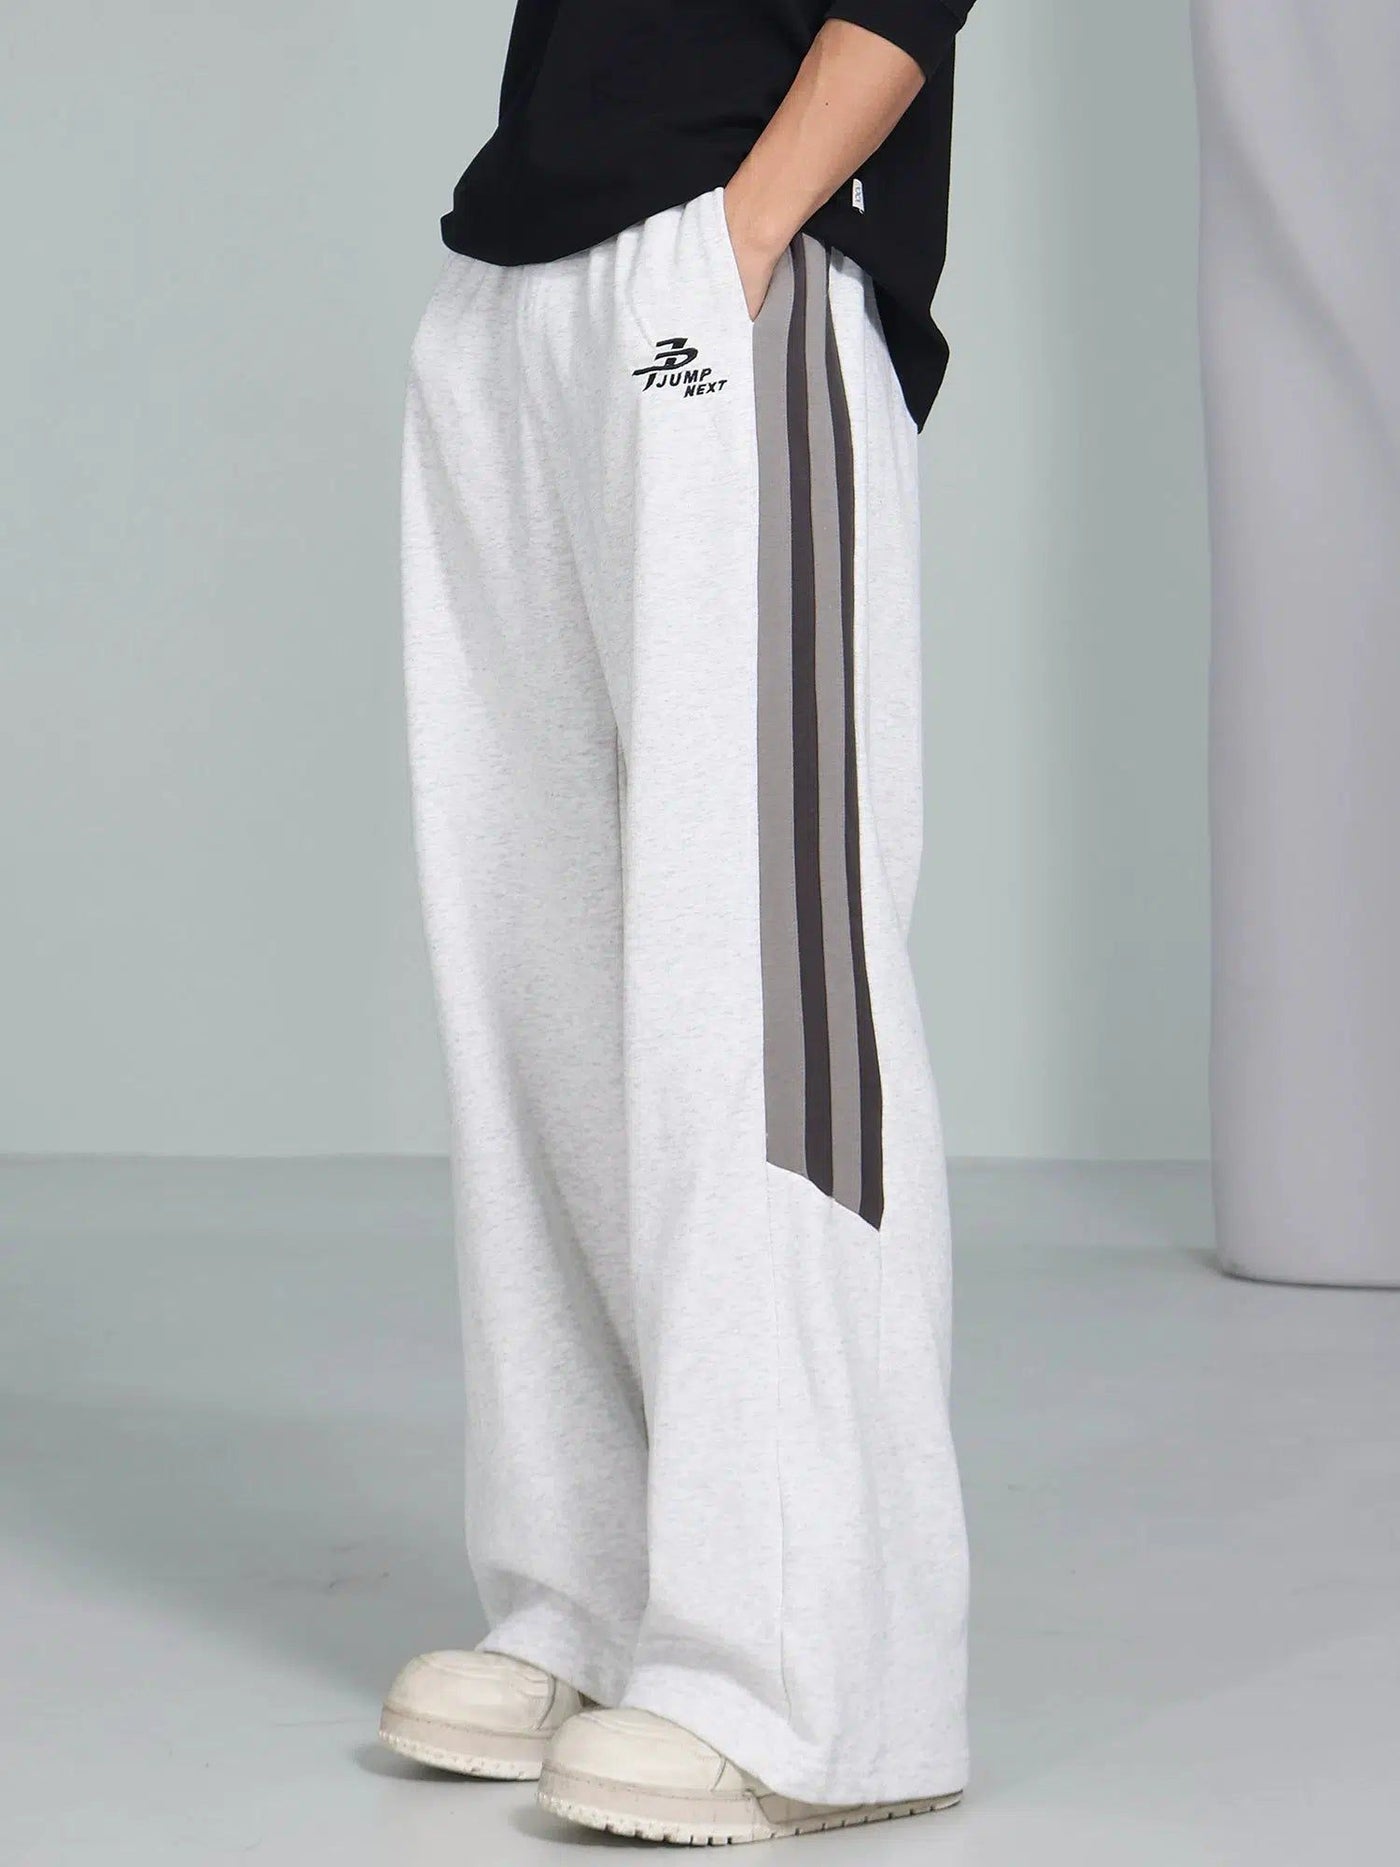 Casual Bootcut Striped Sweatpants Korean Street Fashion Pants By Jump Next Shop Online at OH Vault